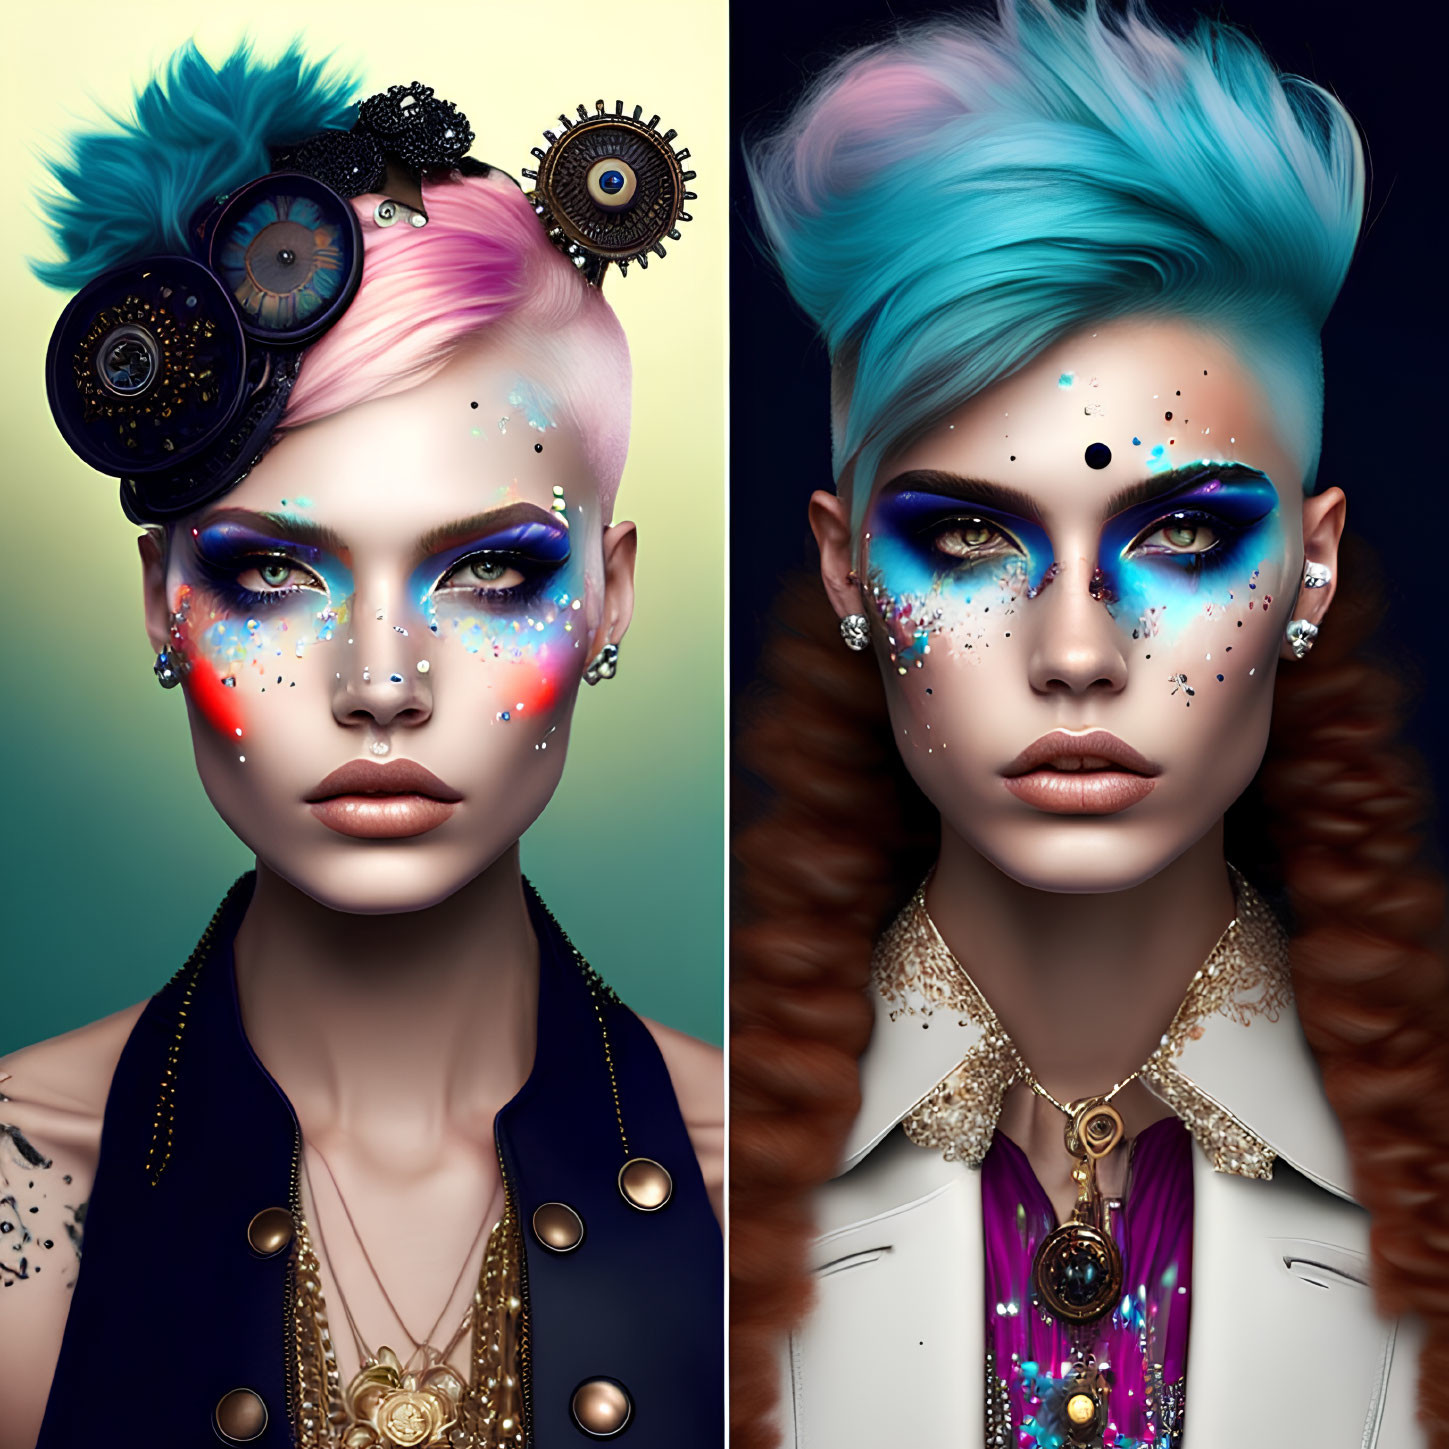 Woman with avant-garde makeup and celestial designs alongside steampunk elements.